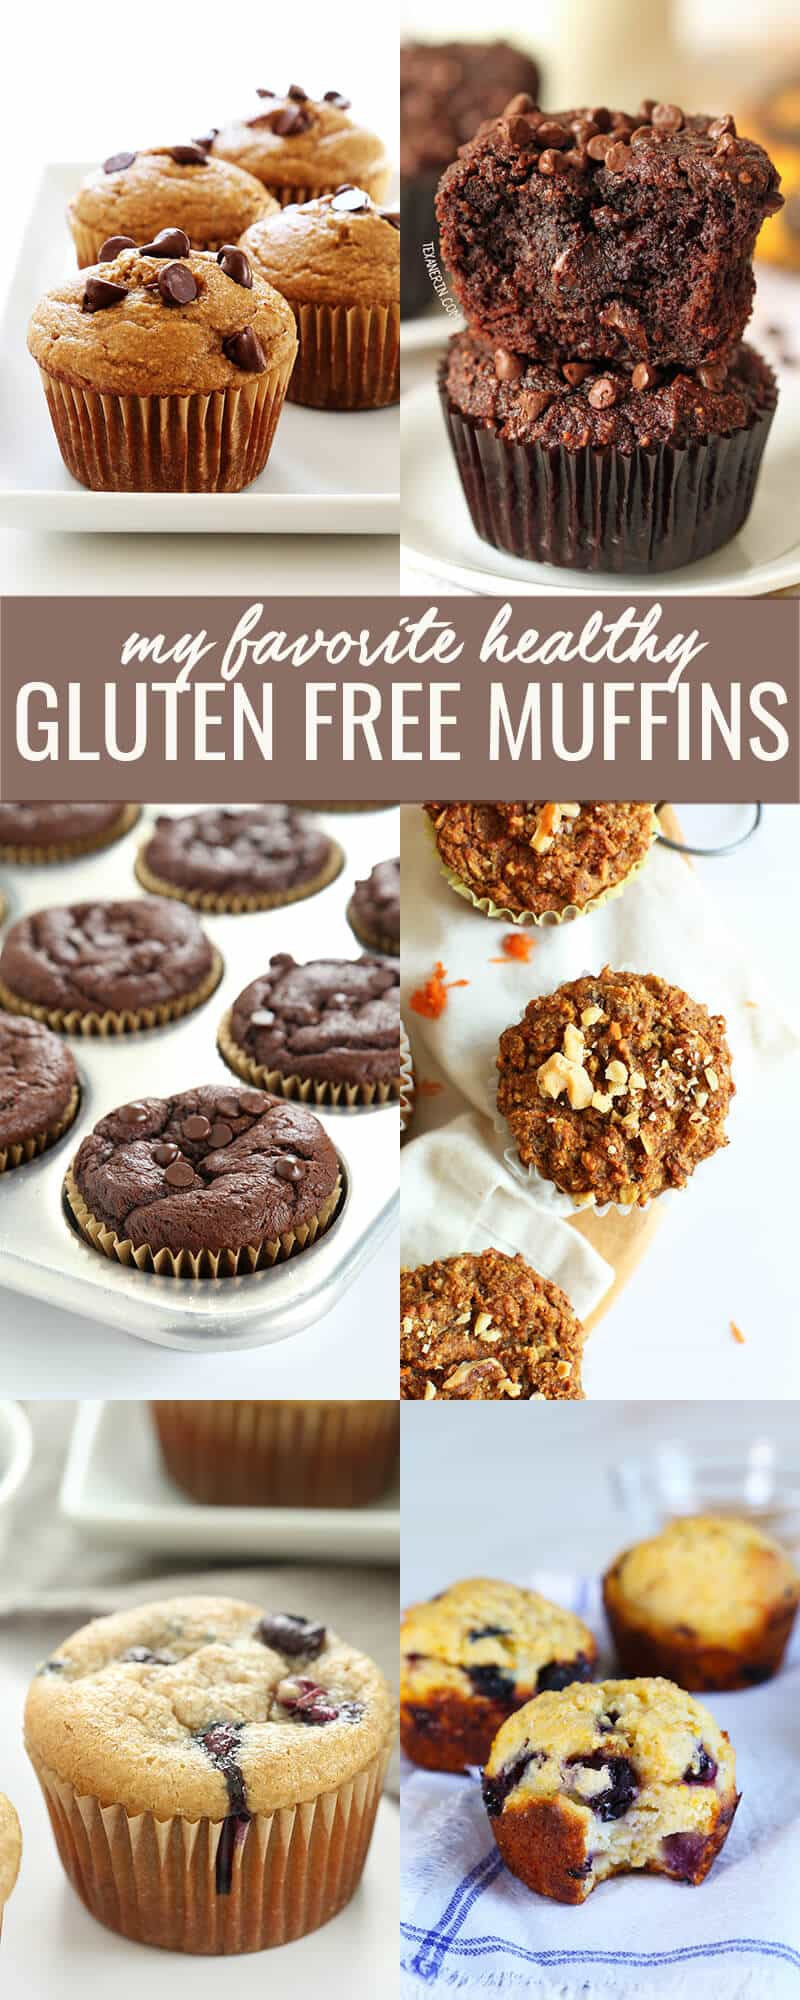 Healthy Gluten Free Muffin Recipes
 Healthy Gluten Free Muffins ⋆ Great gluten free recipes